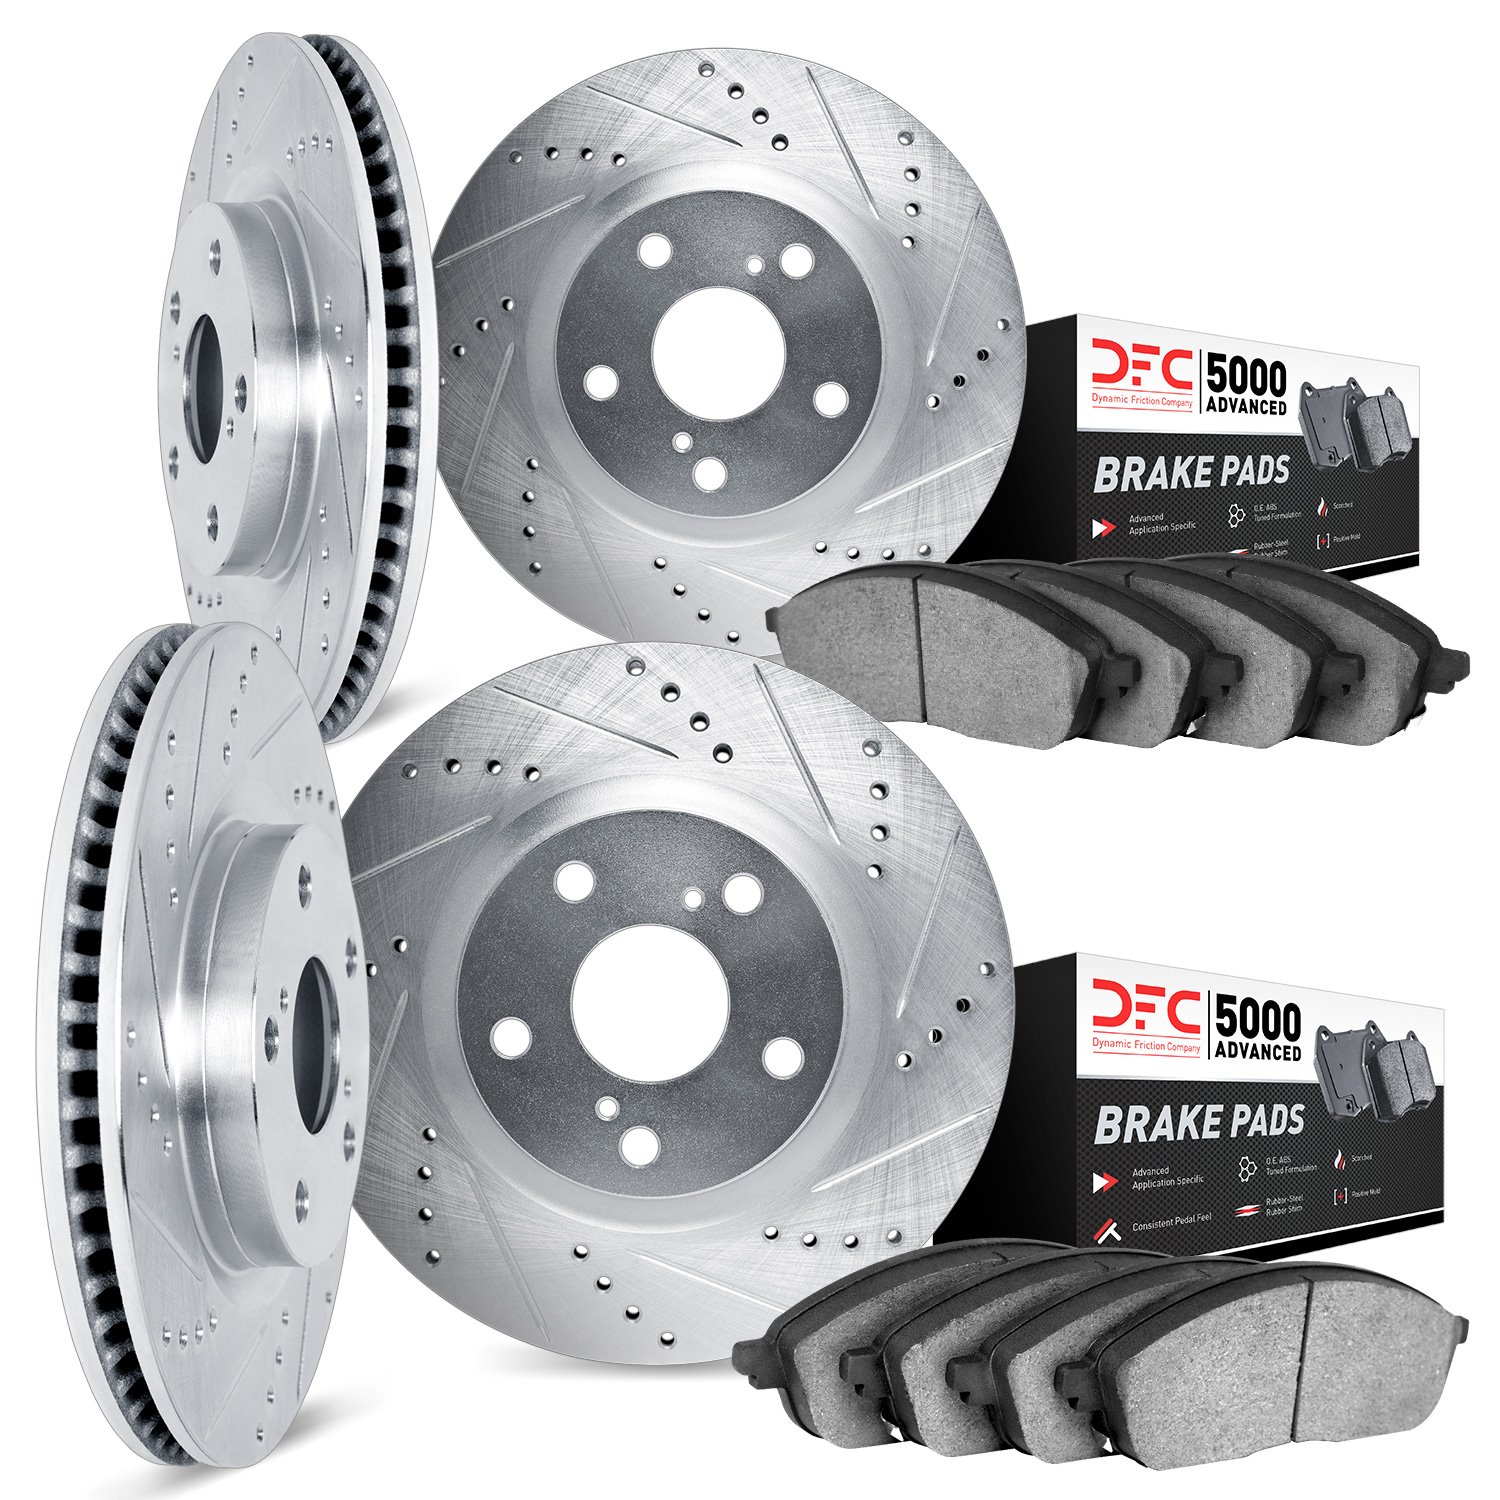 7504-54277 Drilled/Slotted Brake Rotors w/5000 Advanced Brake Pads Kit [Silver], 2003-2005 Jaguar, Position: Front and Rear